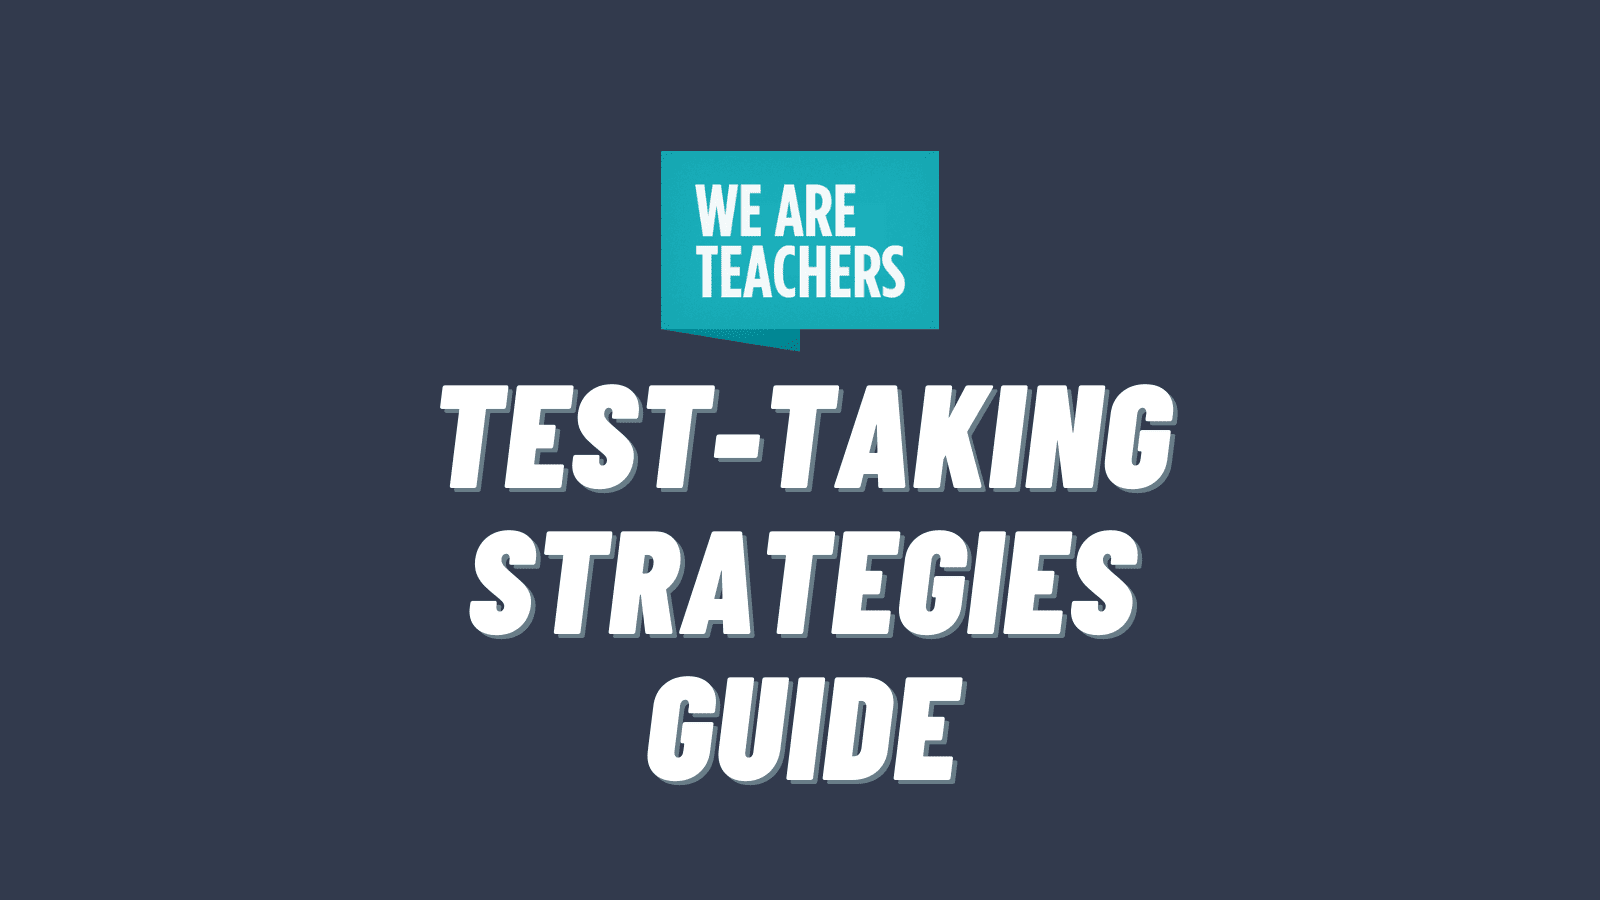 WeAreTeachers logo along with text that says Test-Taking Strategies Guide